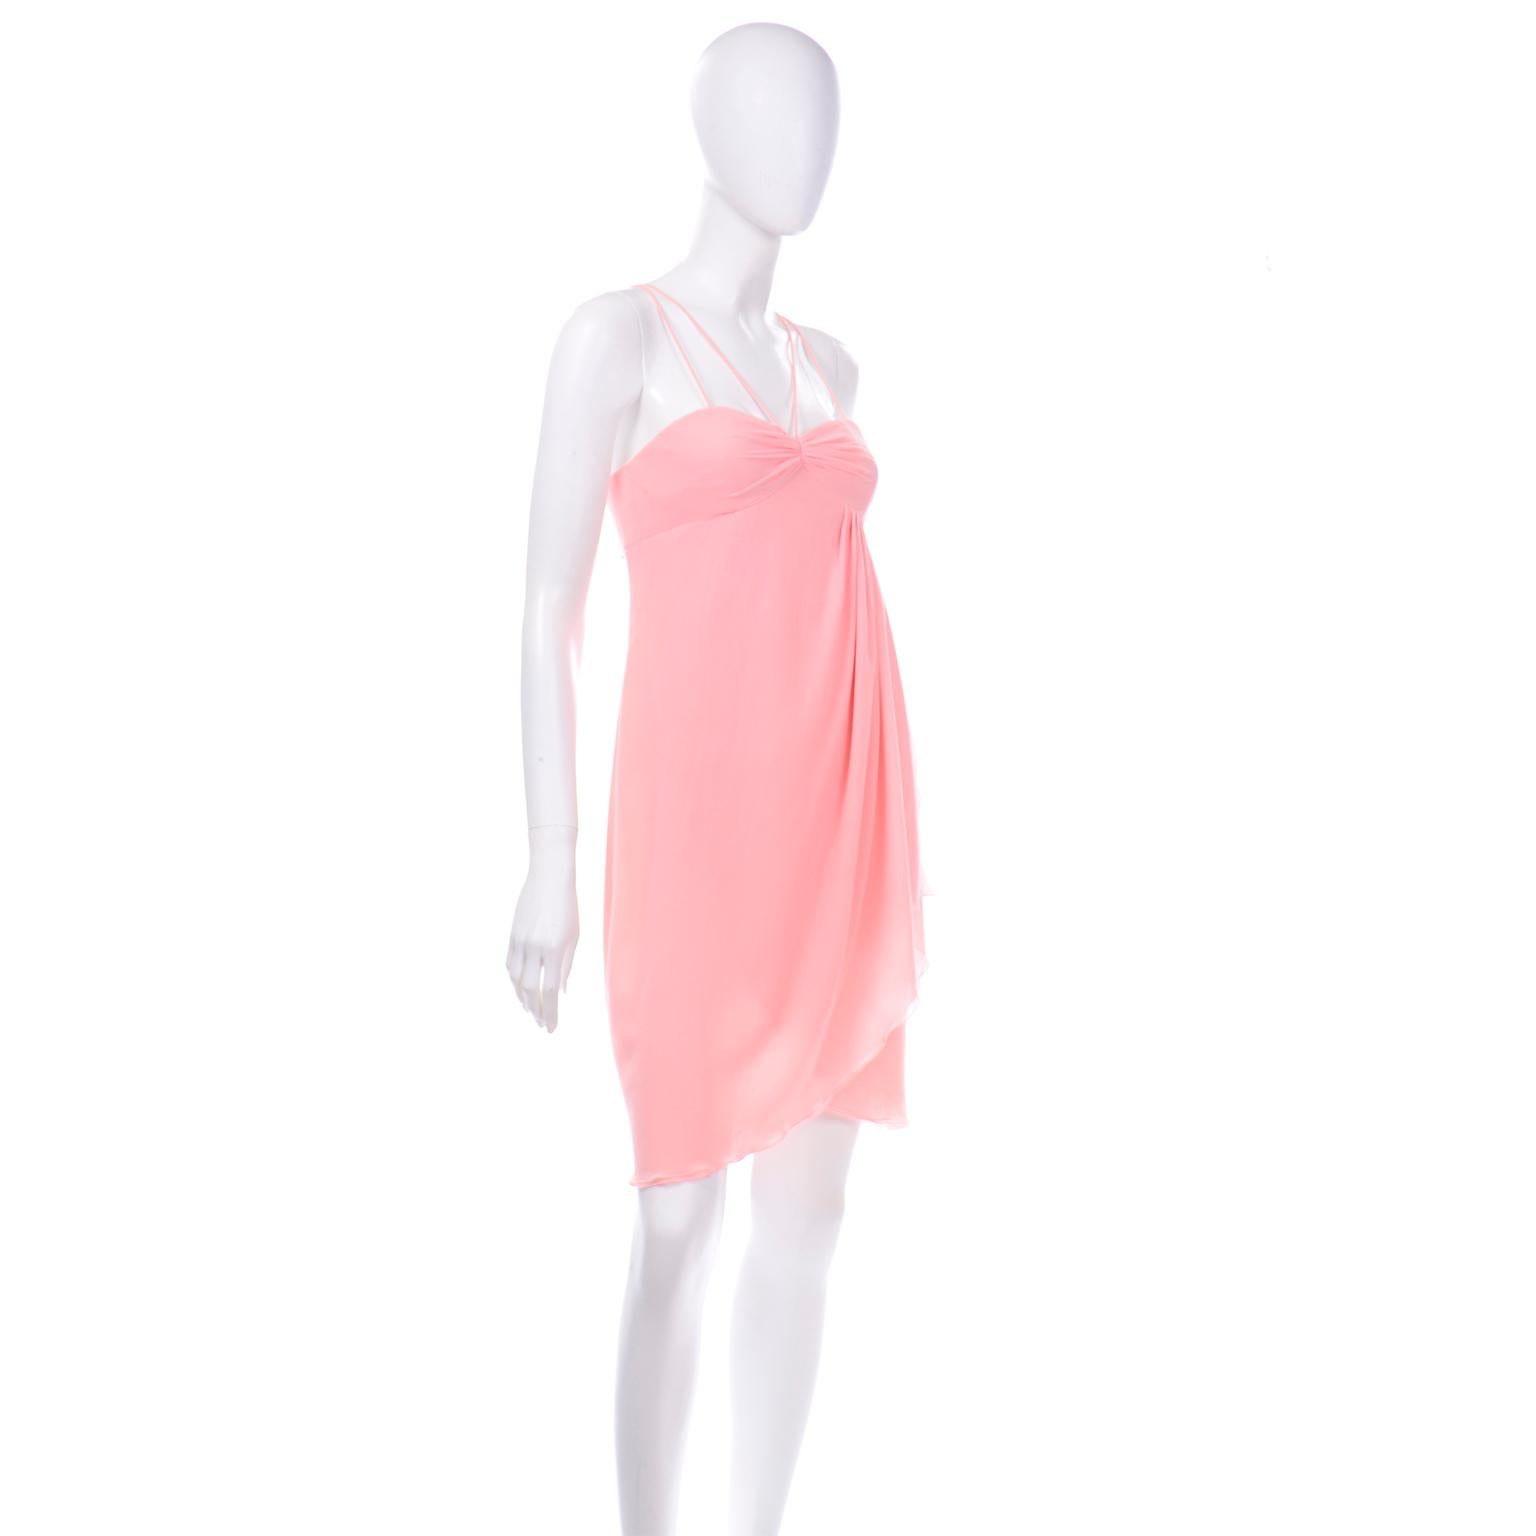 Emanuel Ungaro Parallele Pink Silk Chiffon Vintage Cocktail Evening Dress In Excellent Condition For Sale In Portland, OR